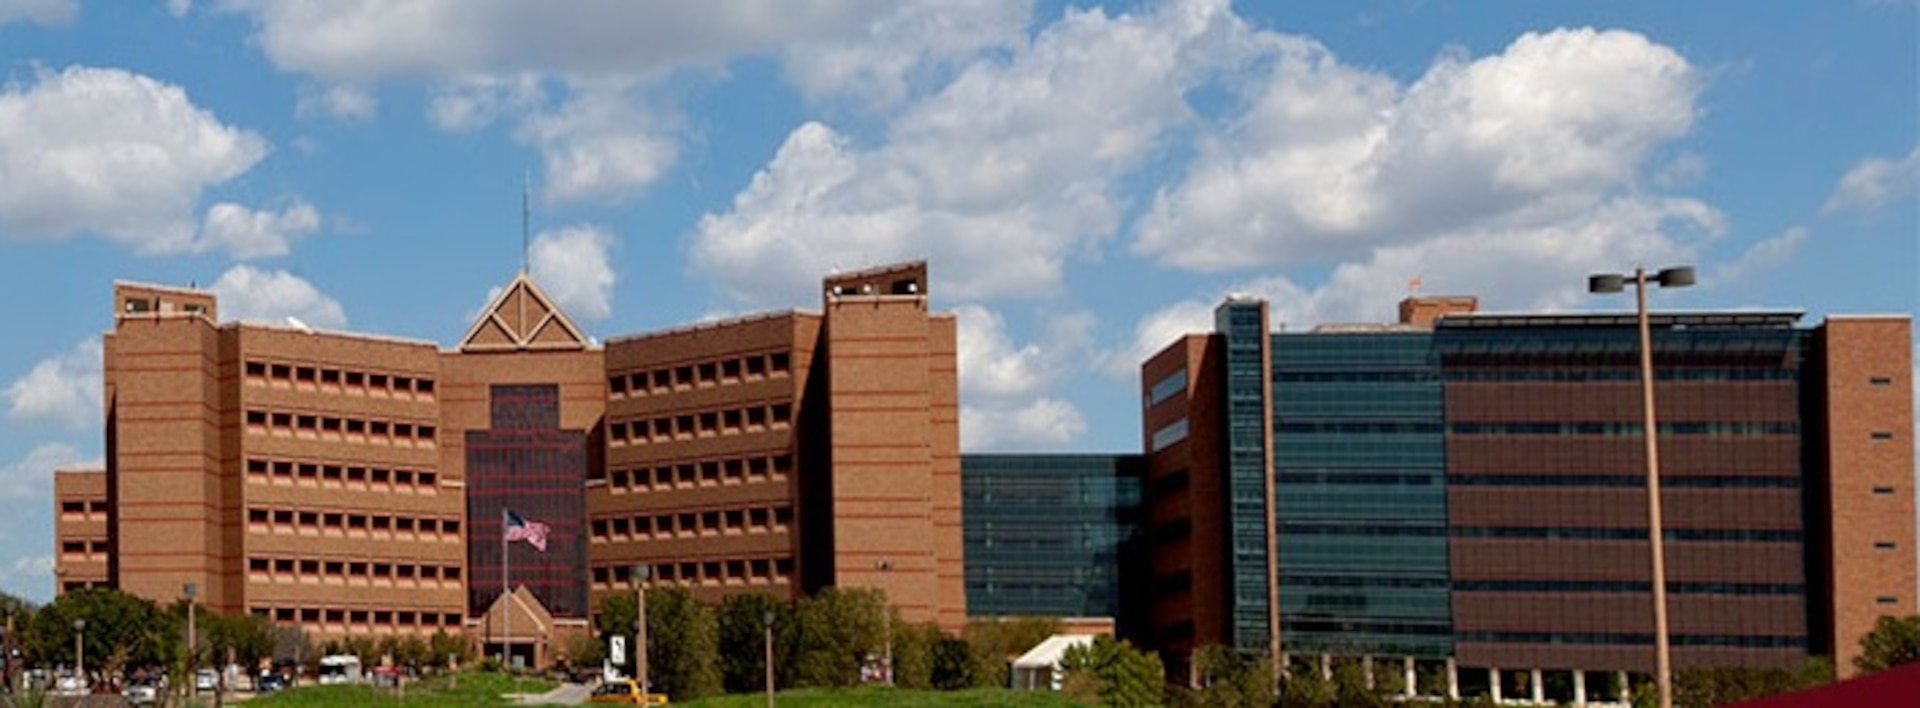 Brooke Army Medical Center Department of Pathology and Area Laboratory Services has been recognized as one of the longest College of American Pathologists-accredited laboratories in the United States.